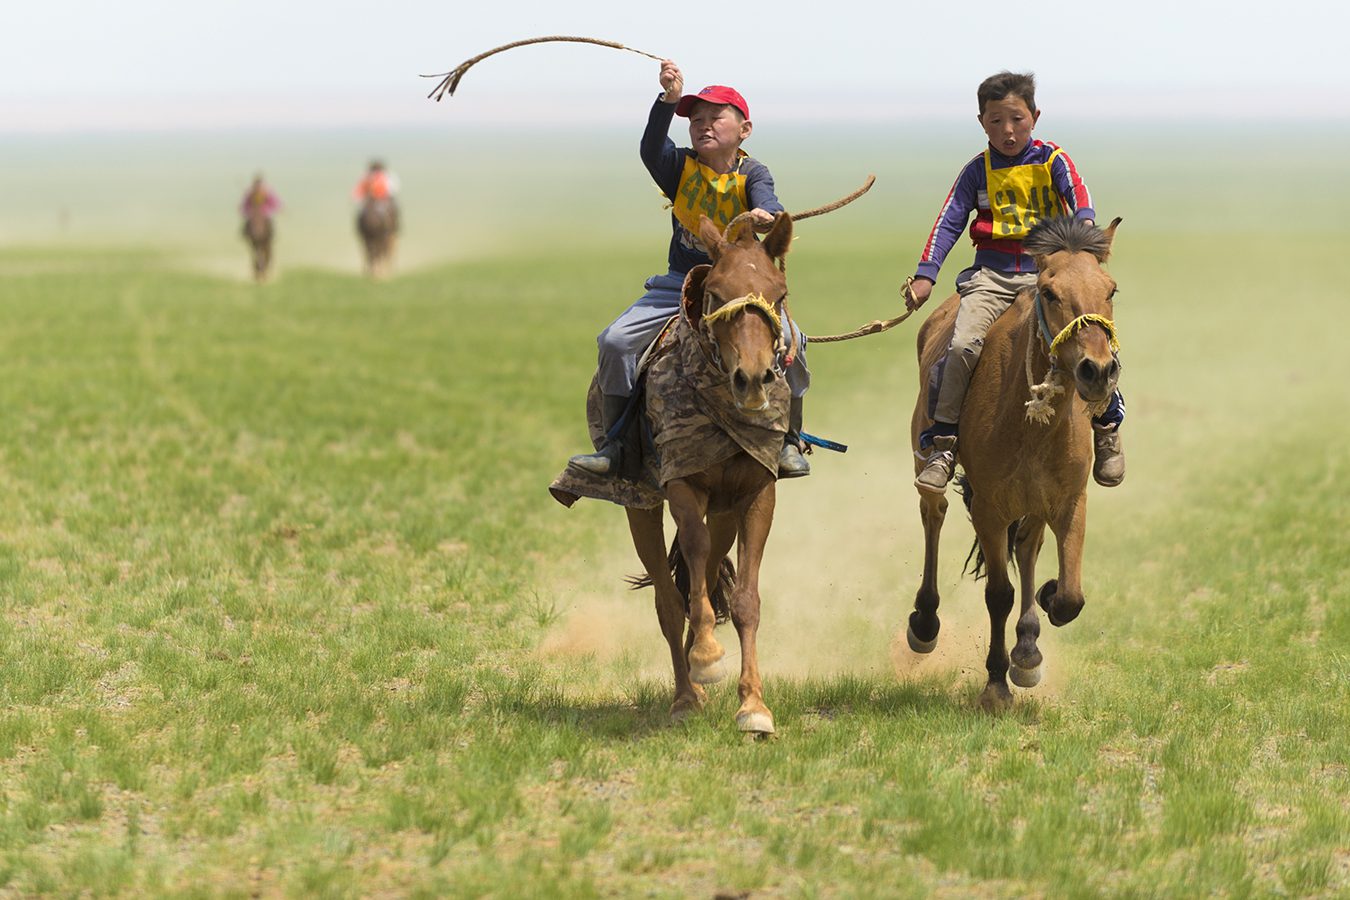 Mini Naadam (traditional festival and games from nomadic people) at Lamin Ovoo, Gobi desert, Umnugovi province, South Mongolia.